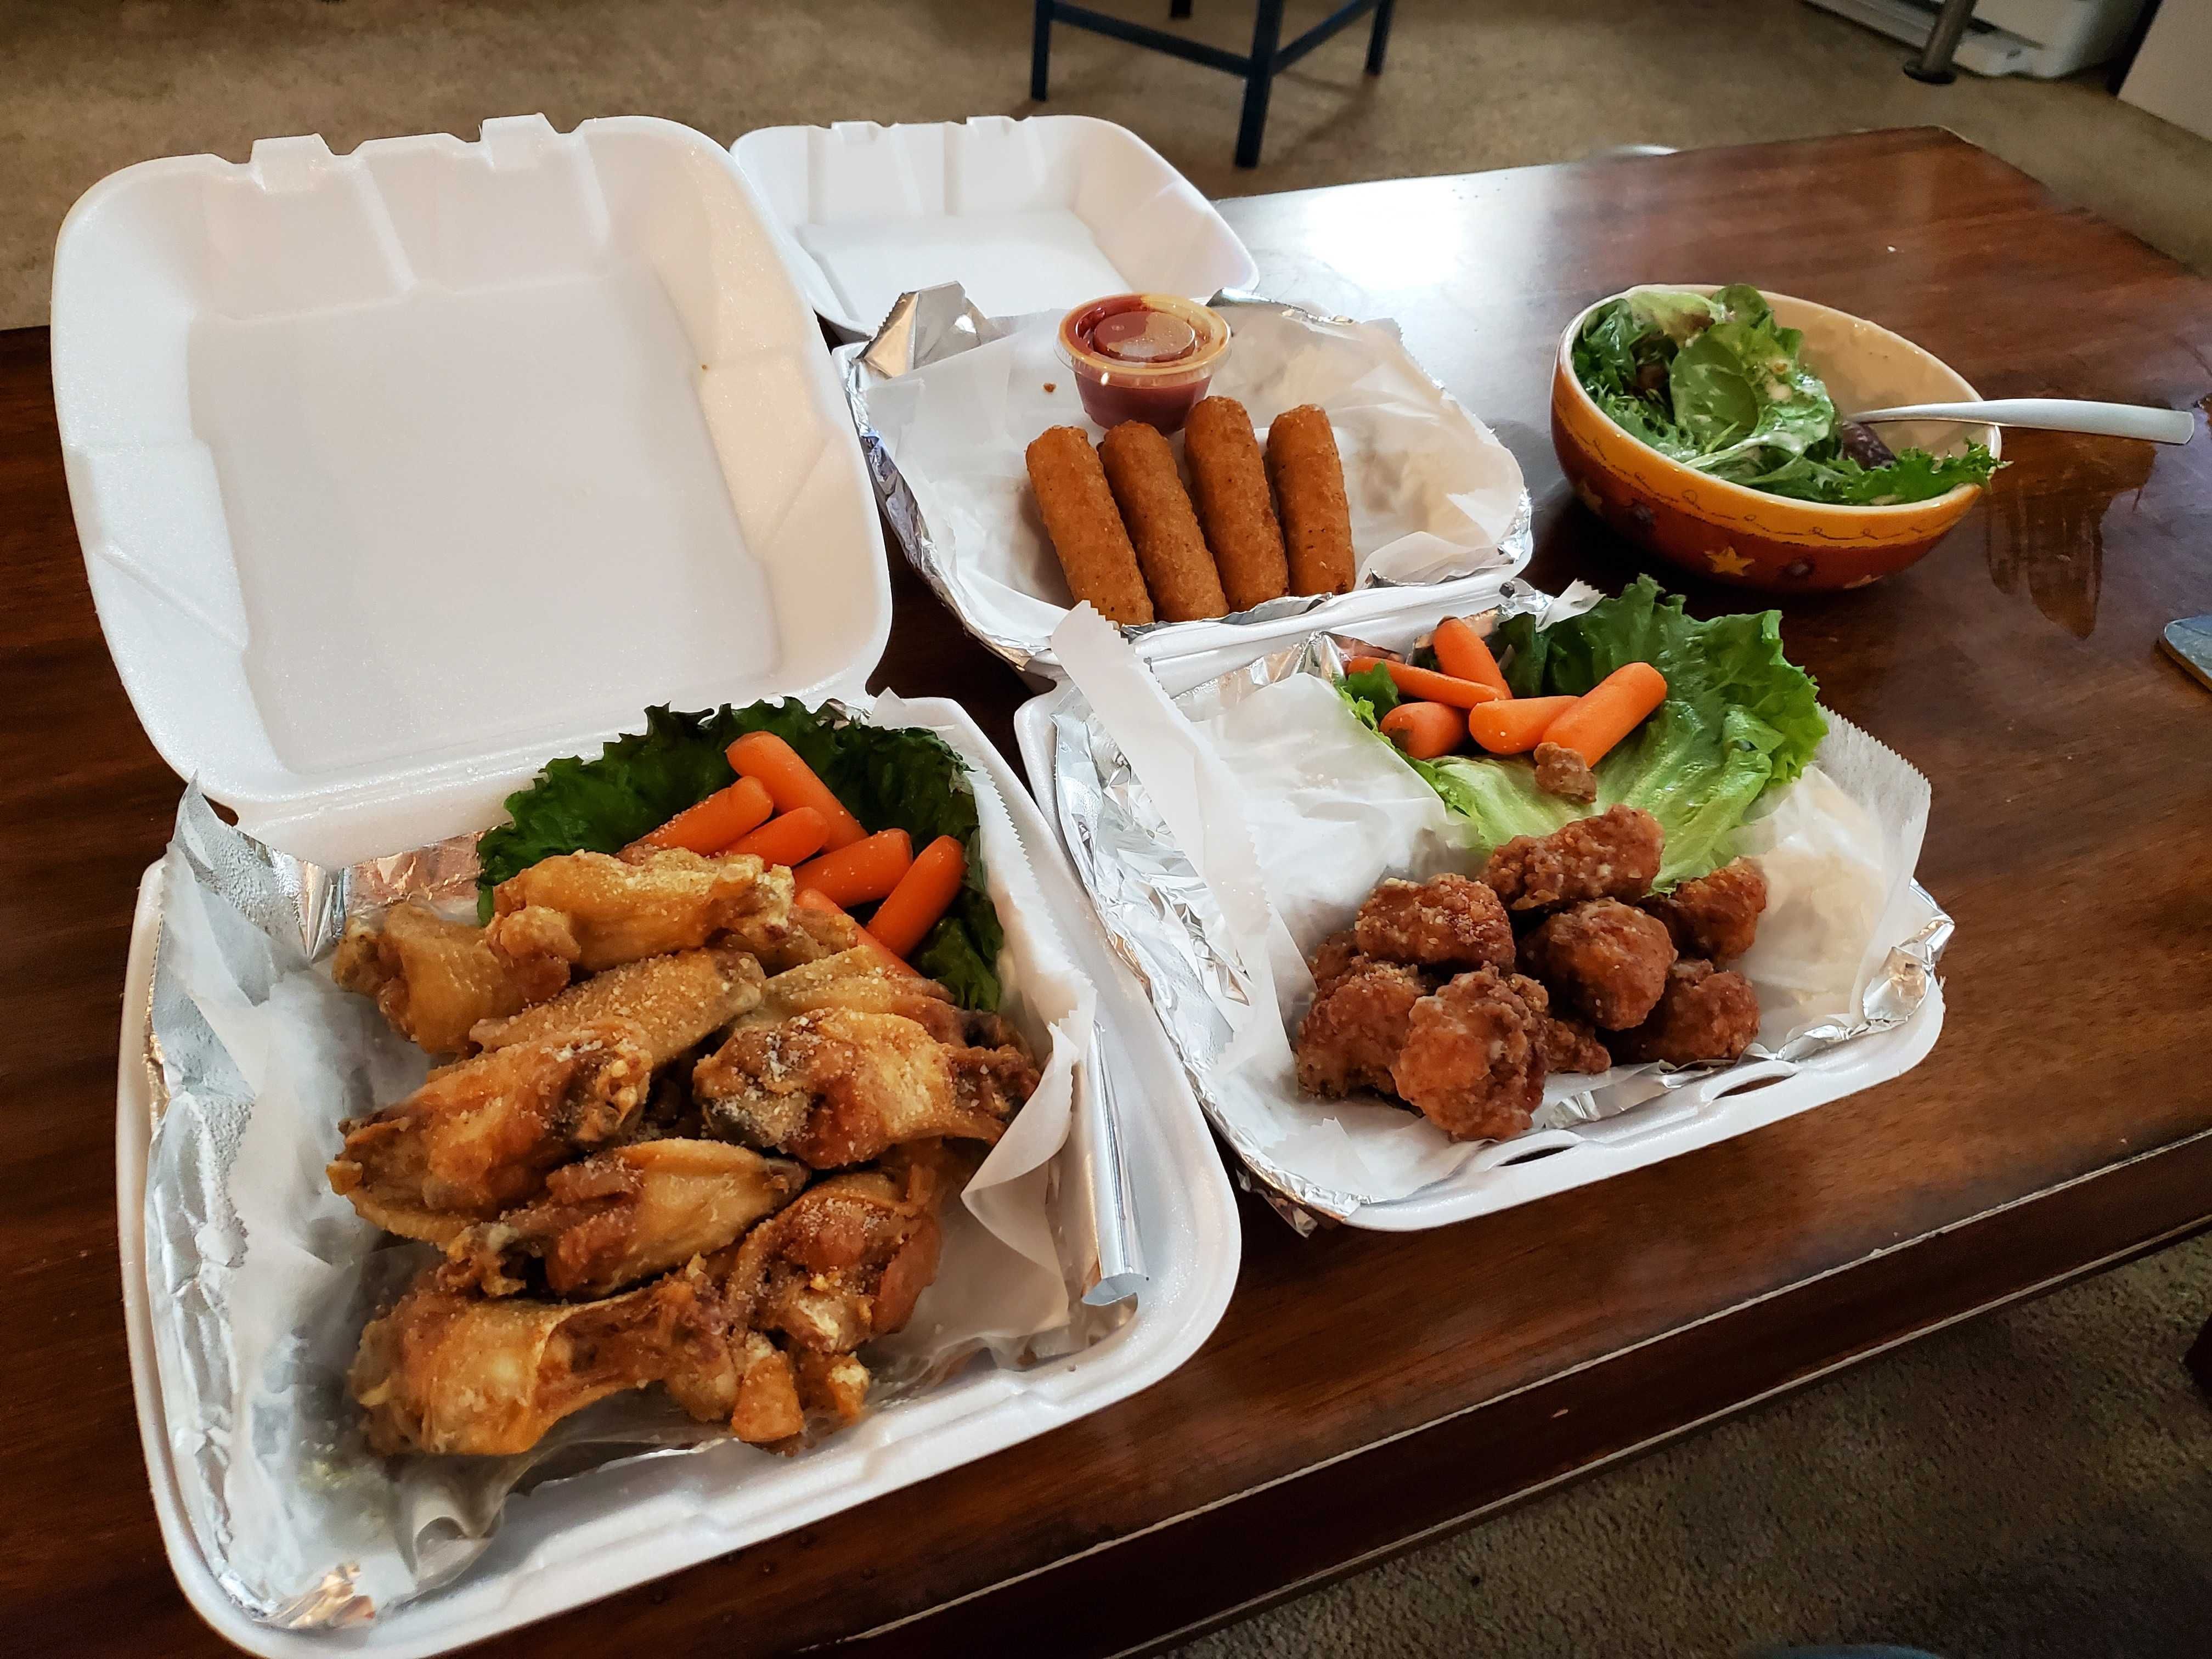 To-go containers full of wings, mozzarella sticks and a salad